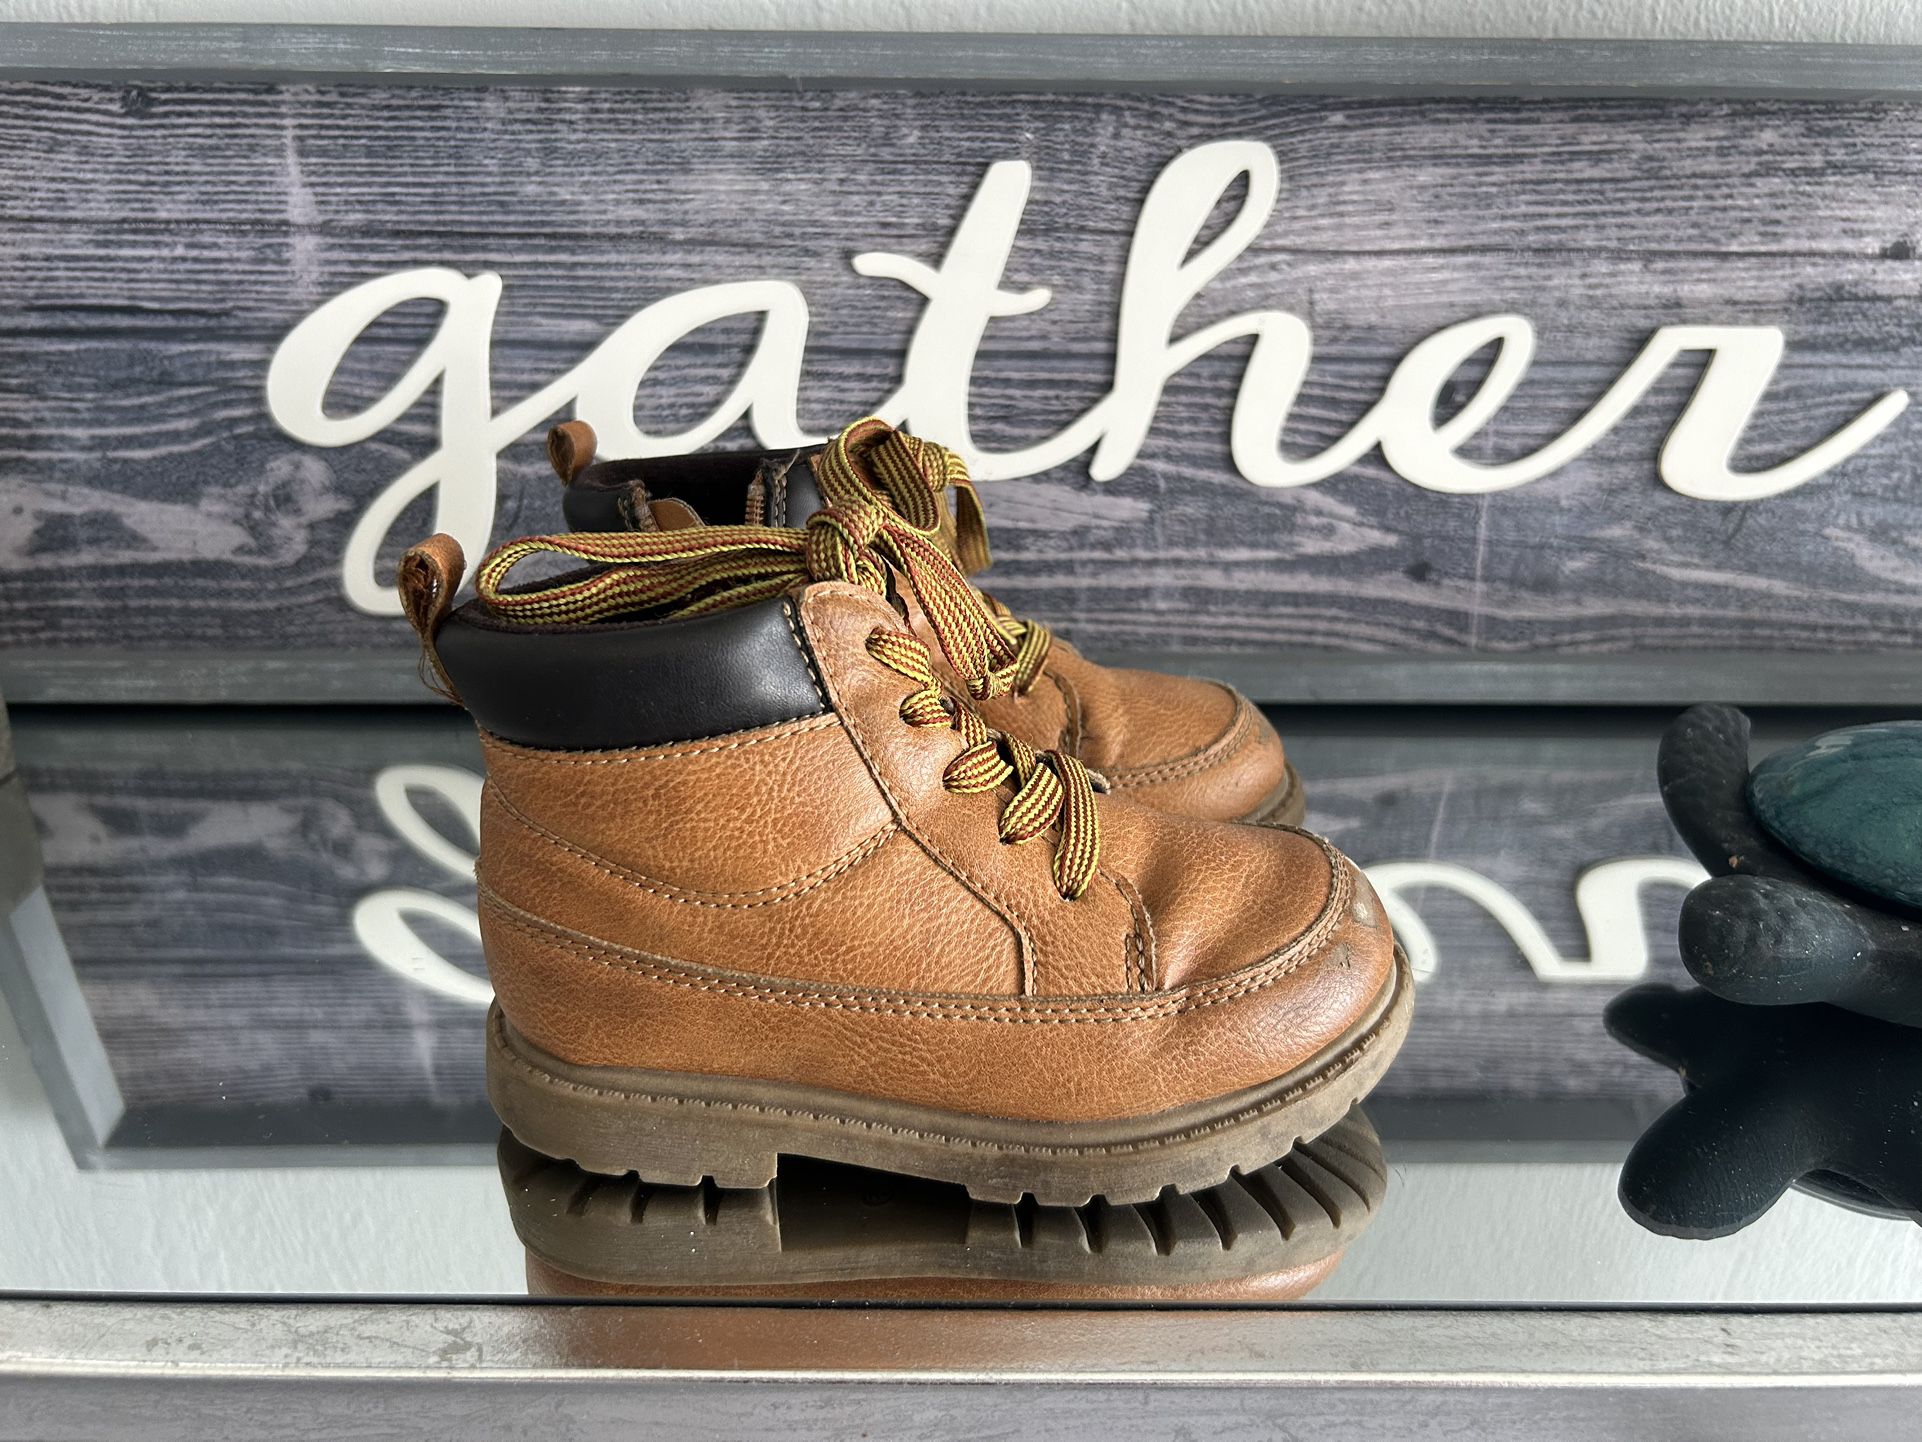 Carters Toddler Boots